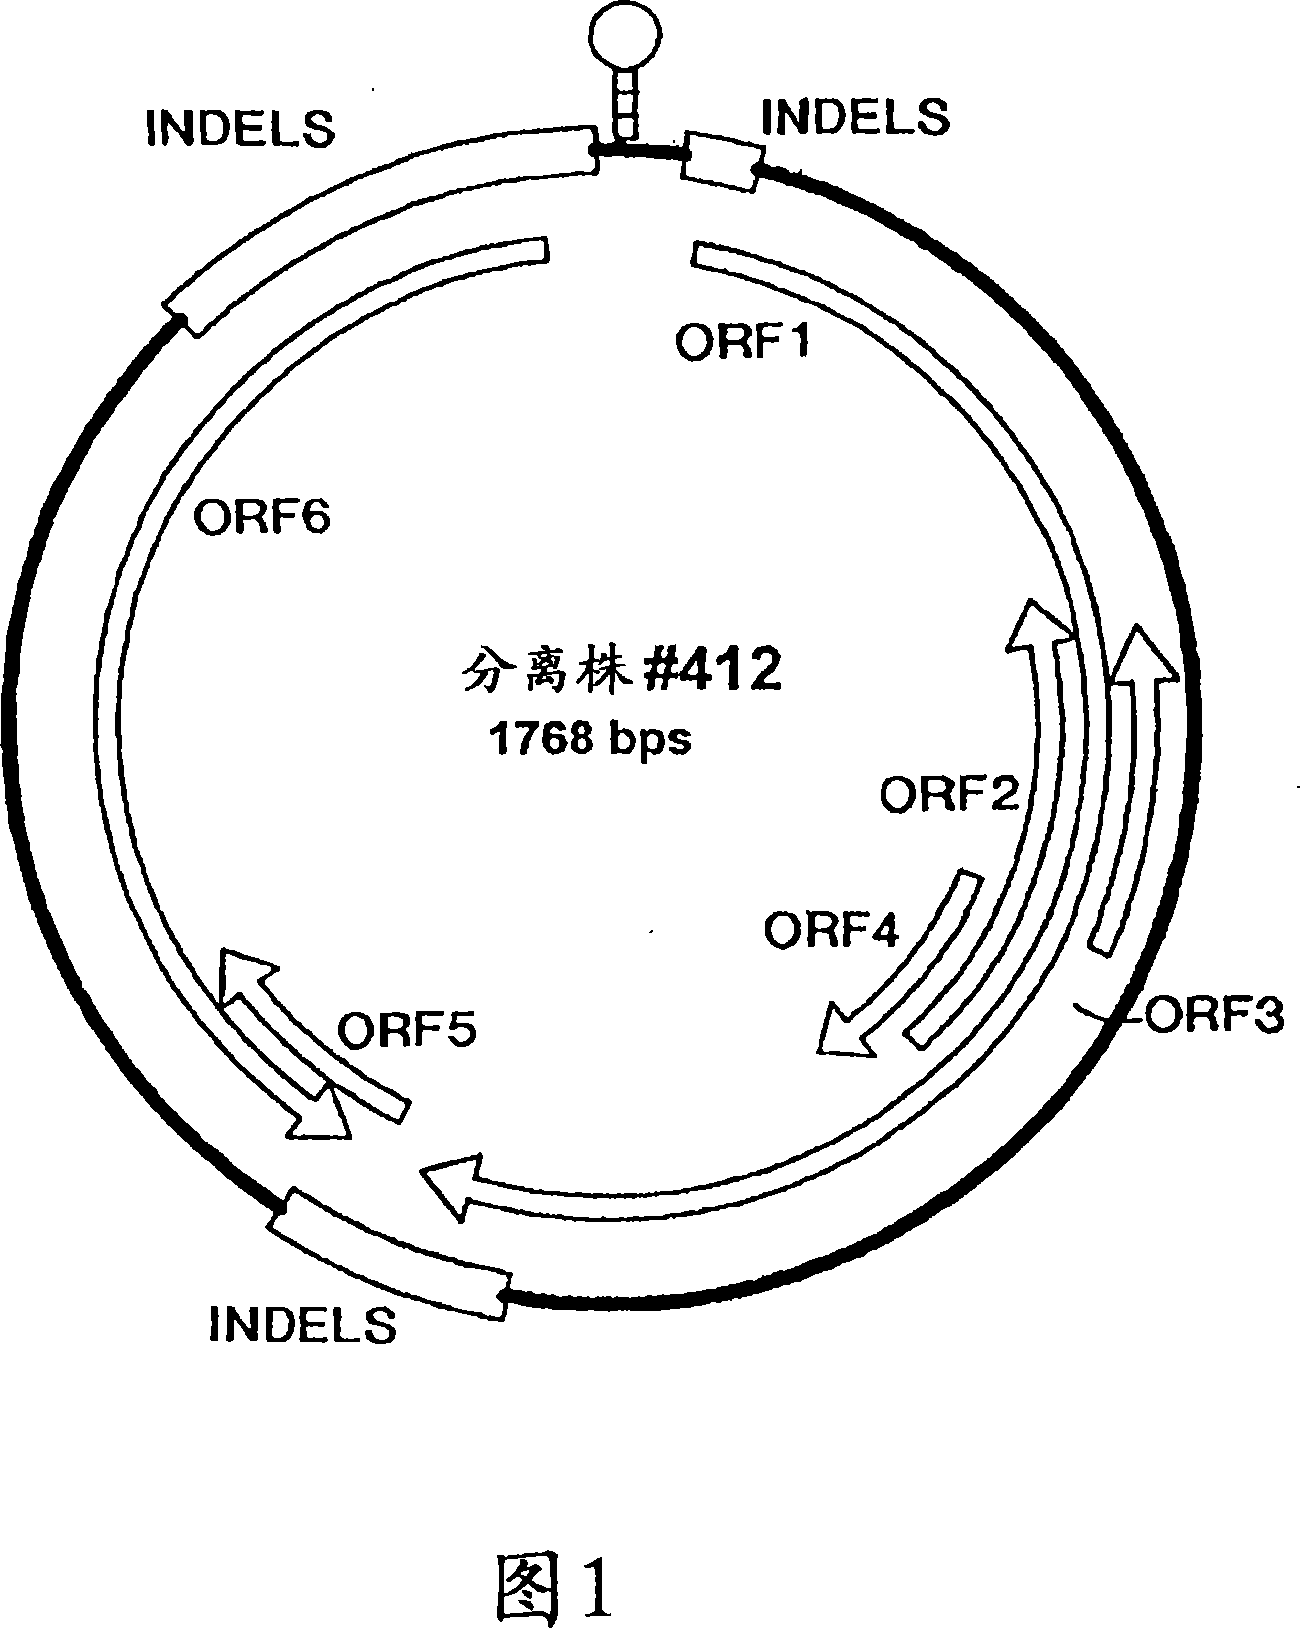 Porcine circovirus and helicobacter combination vaccines and methods of use